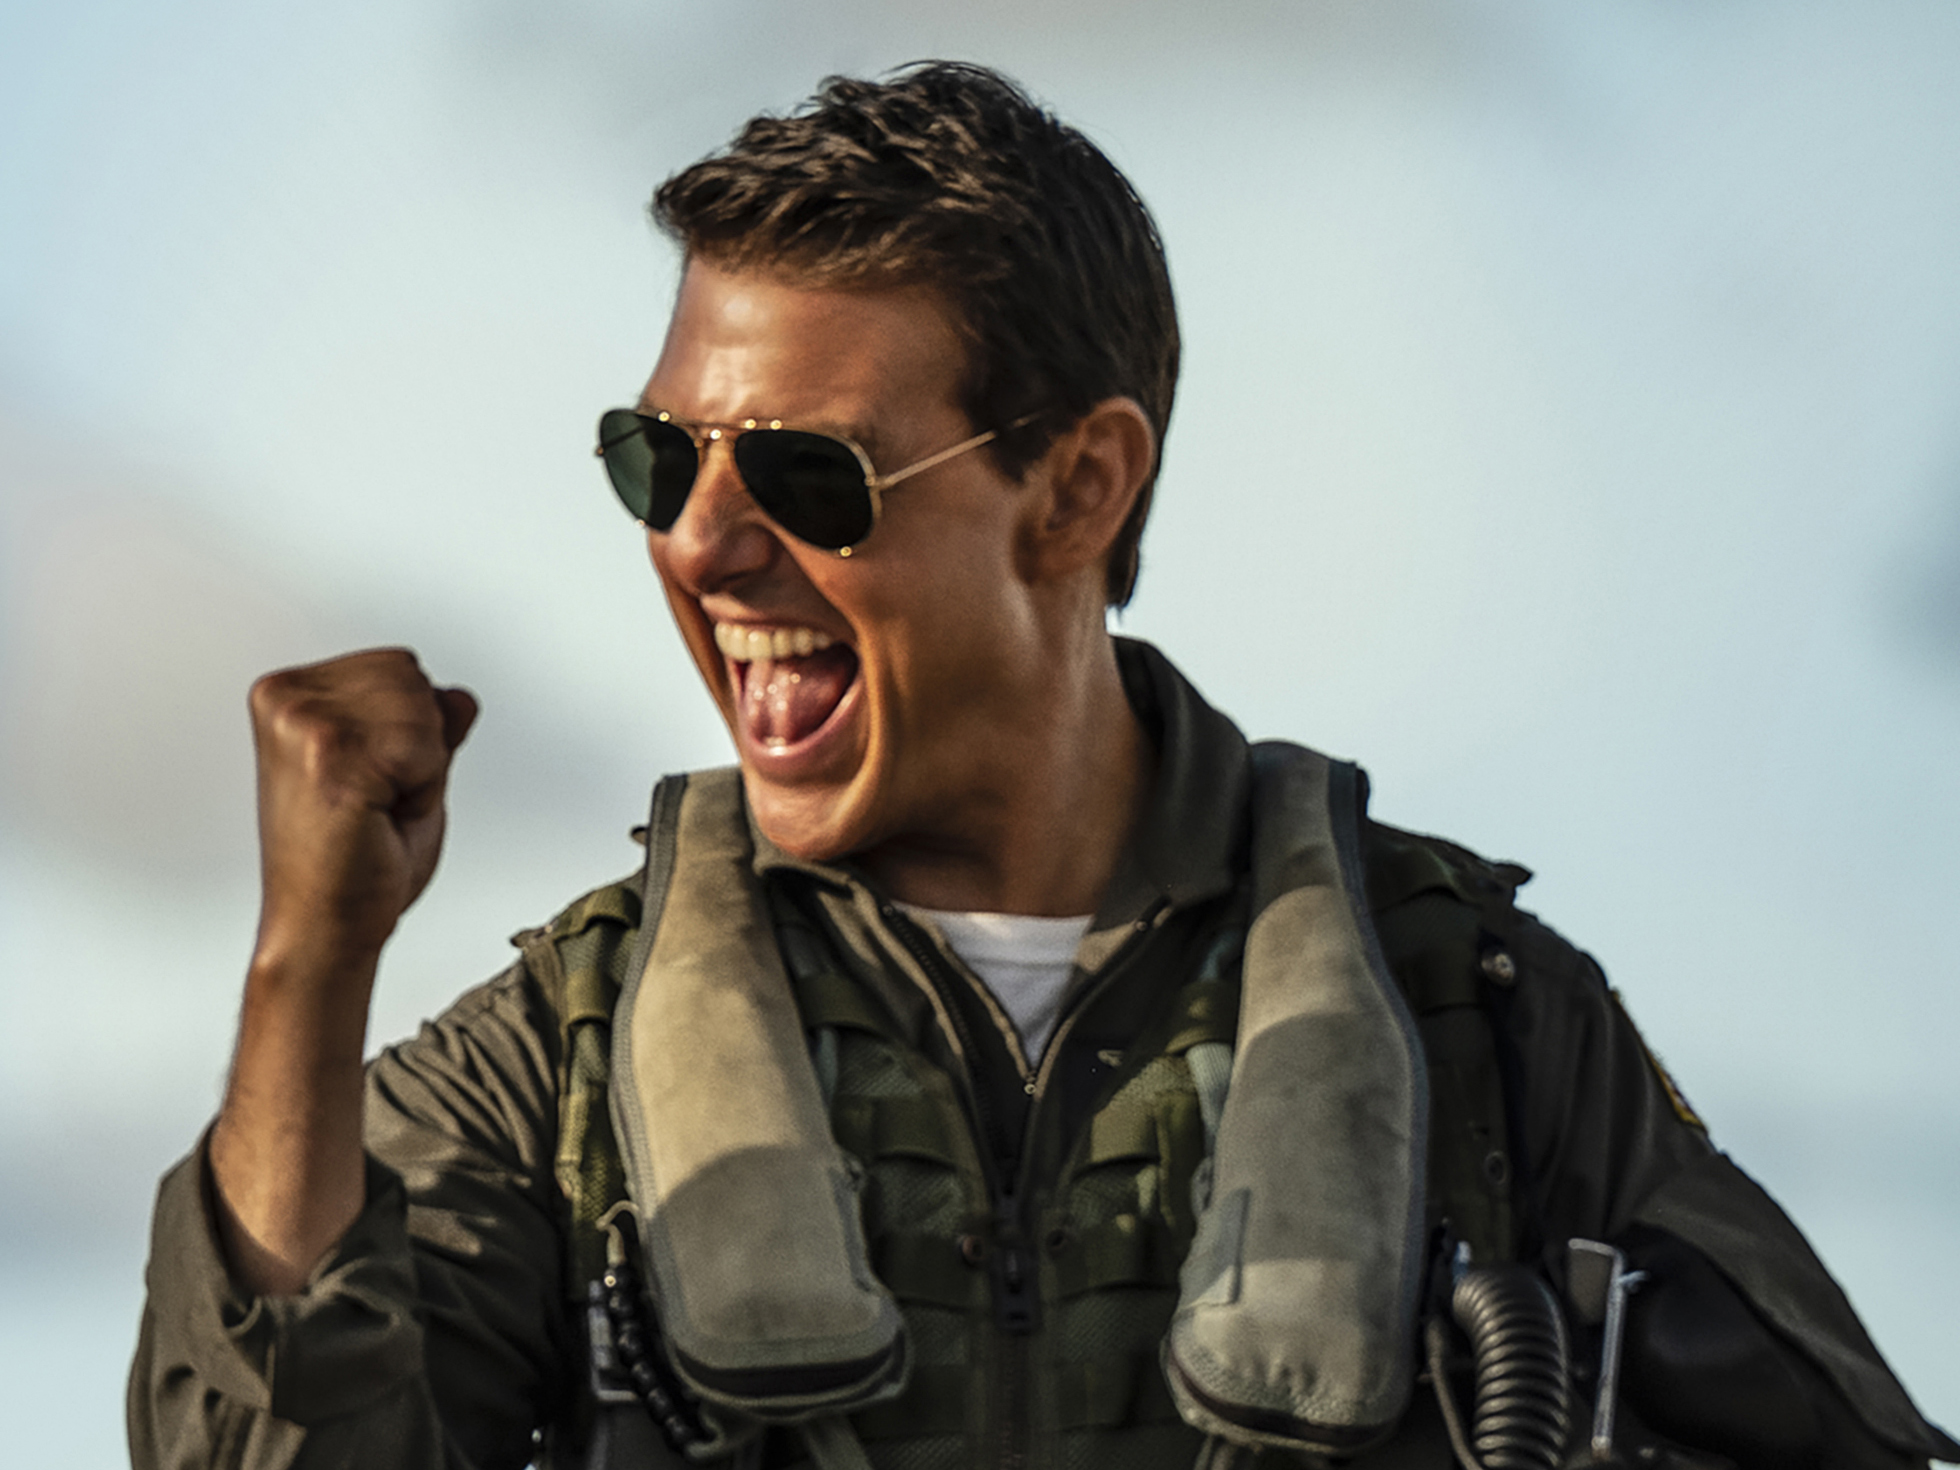 Top Gun's Tom Iceman Kazansky: Facts That Fans Of The Franchise May Not Know